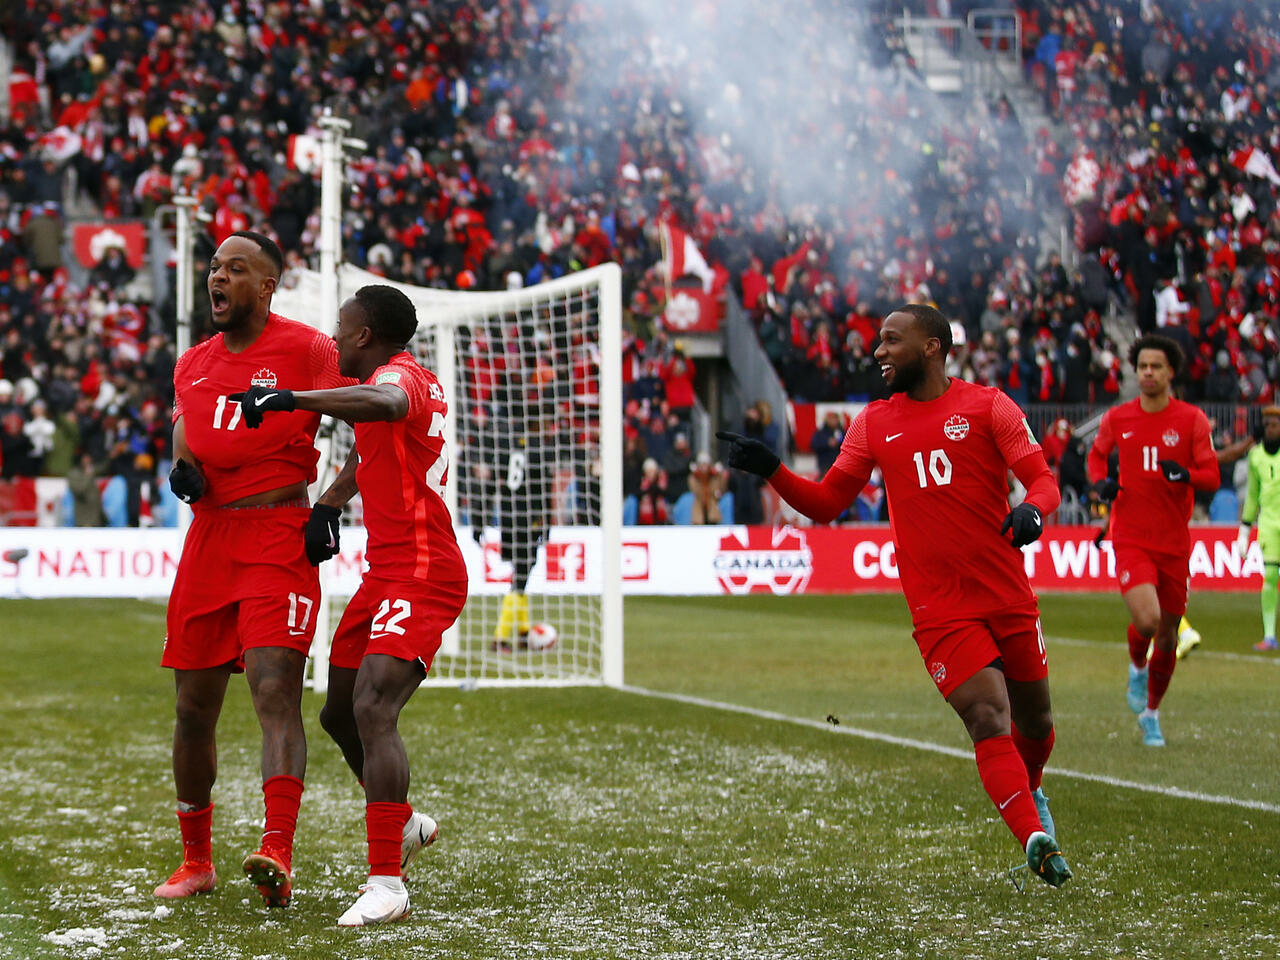 Canada beat Jamaica 40 to reach first World Cup in 36 years